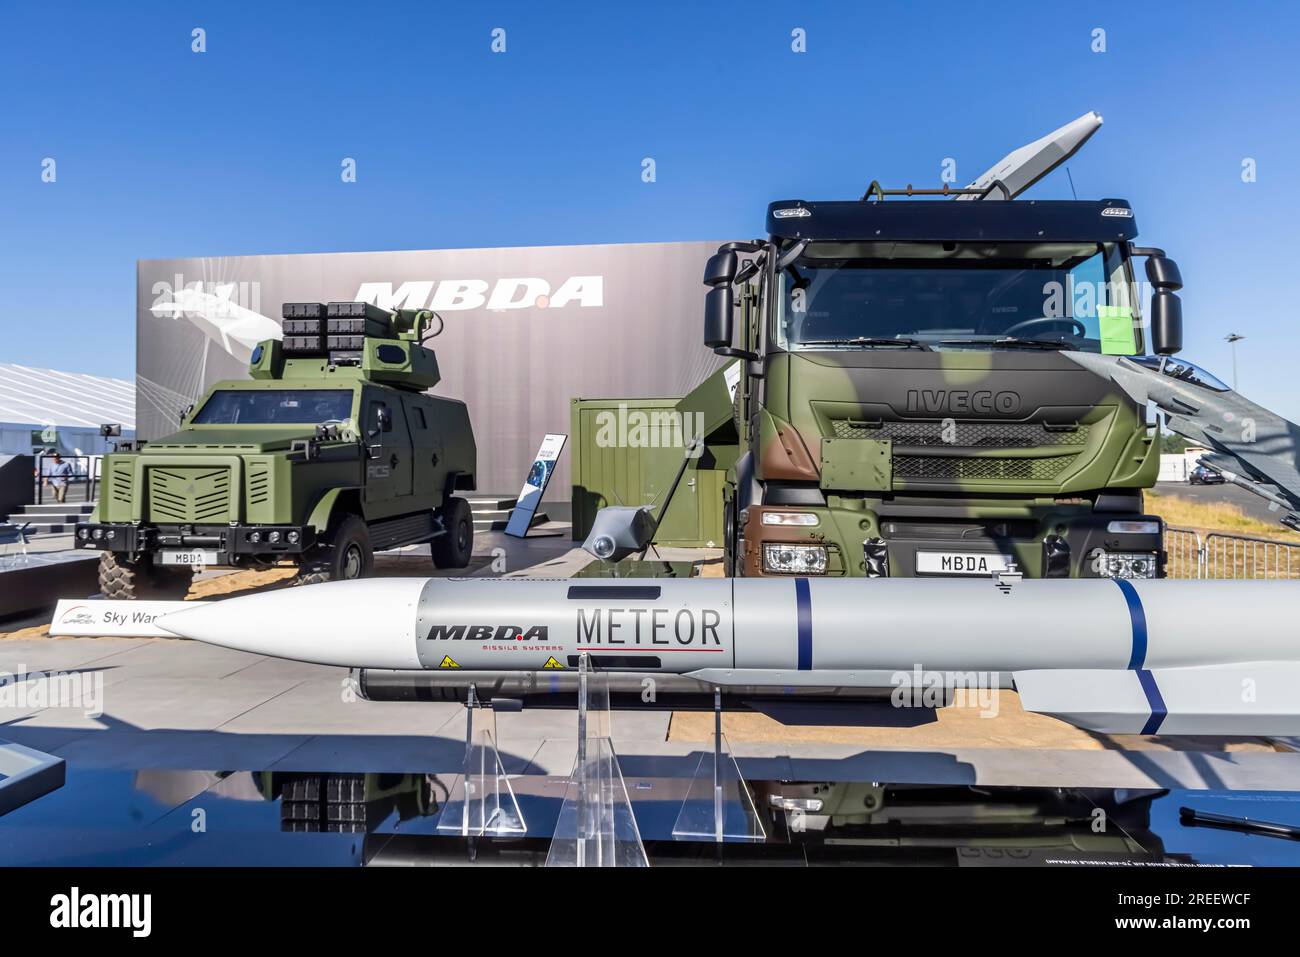 Defence company MBDA, presentation of weapon systems, Missile Systems Meteor, International Aerospace Exhibition, ILA Berlin Air Show, Schoenefeld Stock Photo